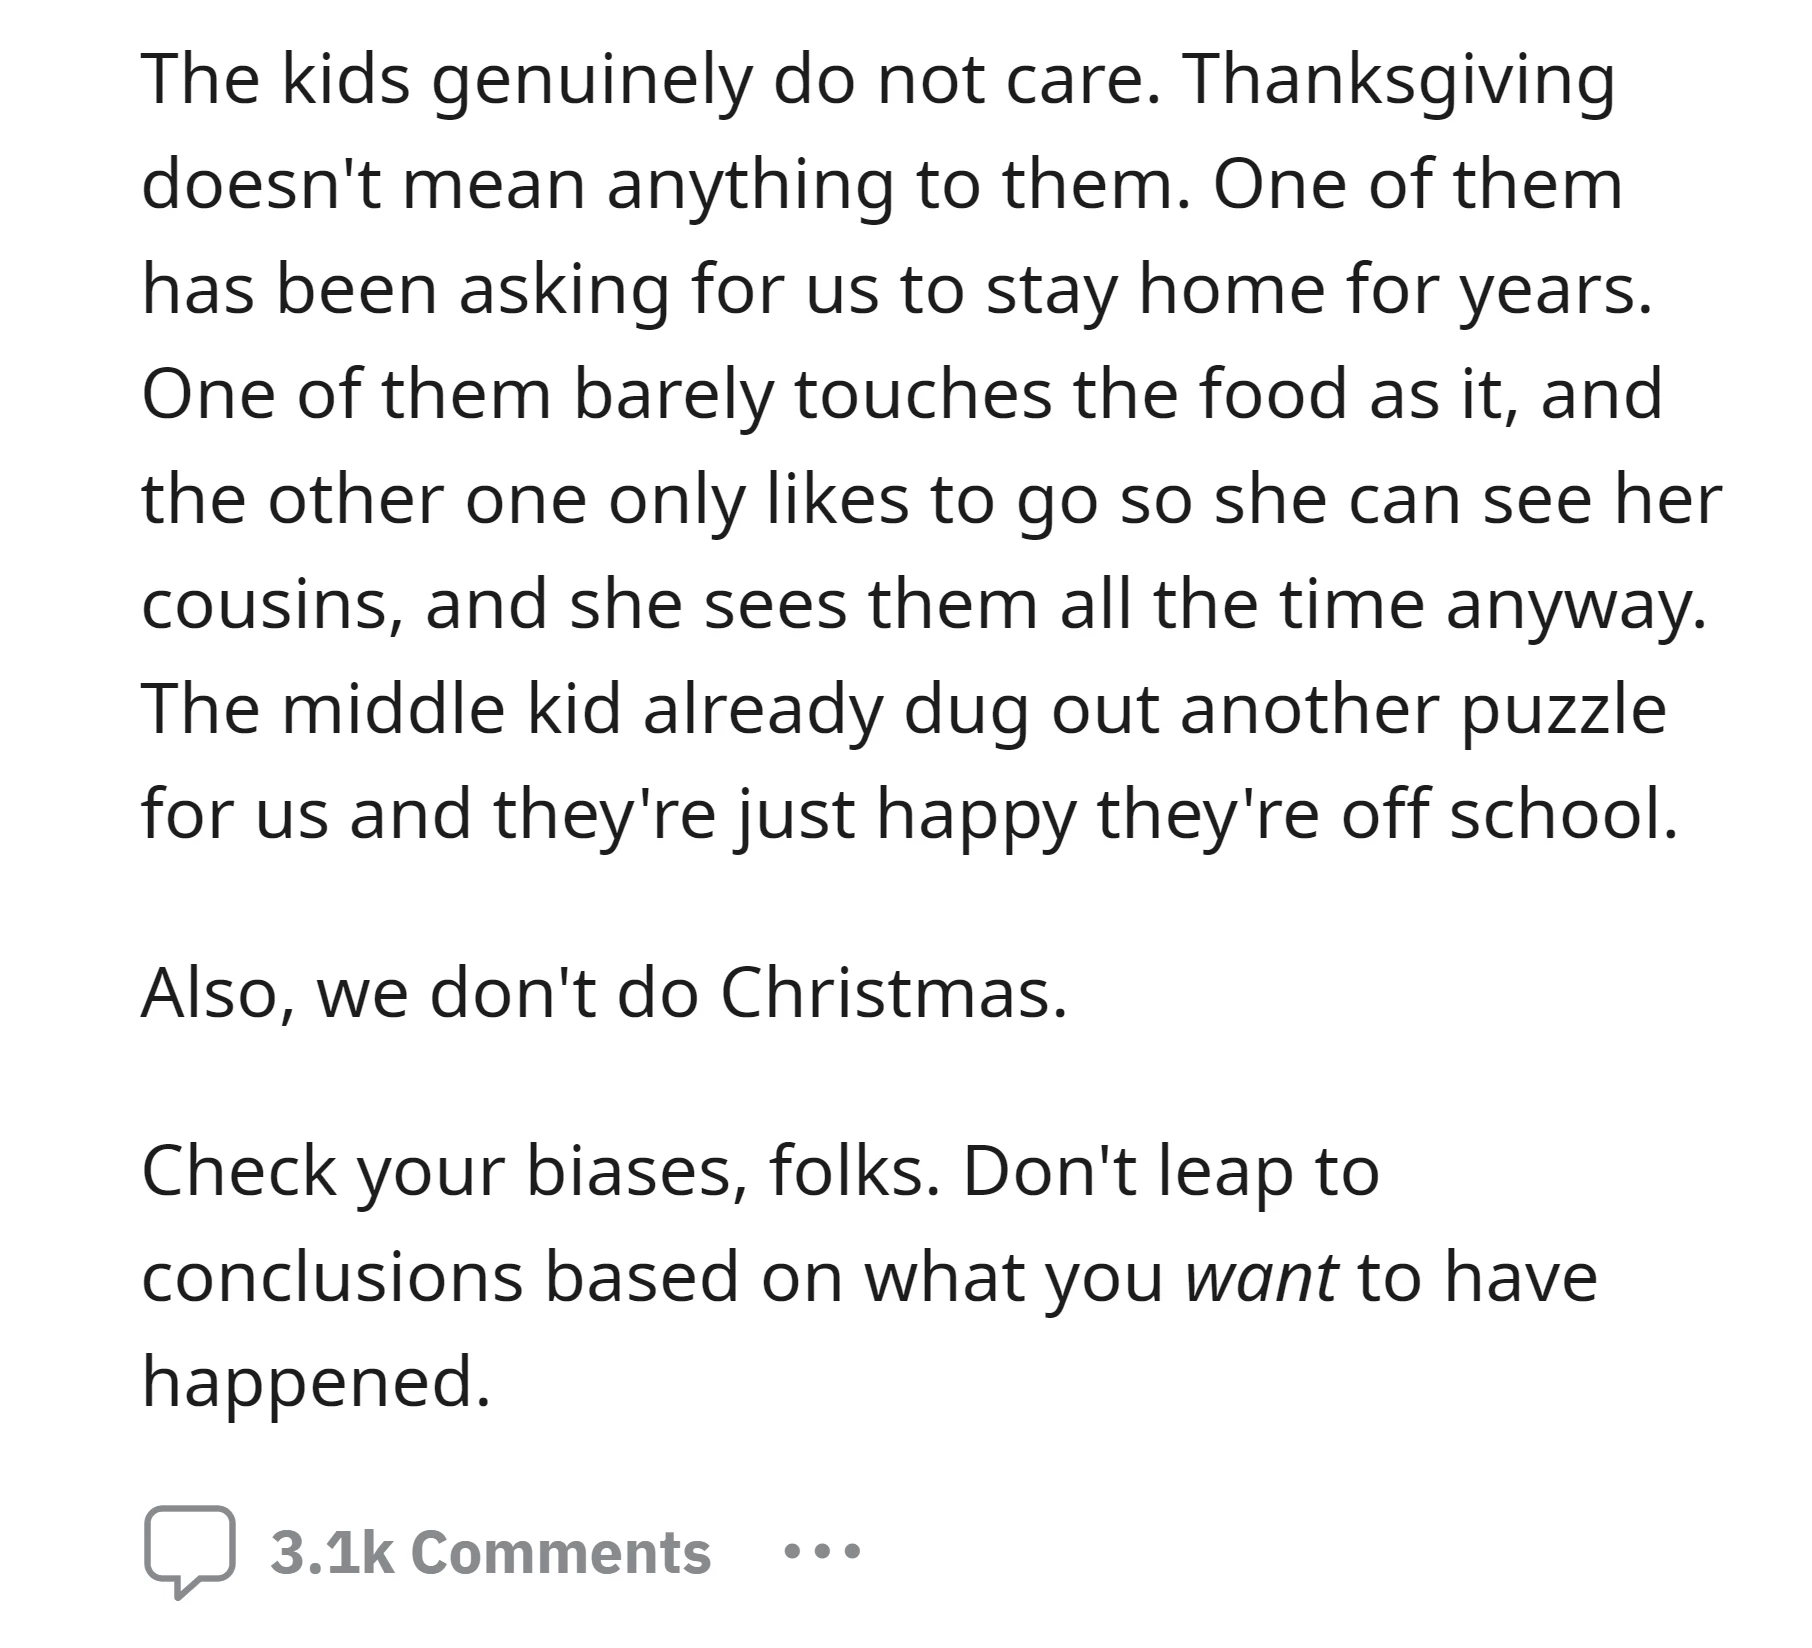 OP clarified that their kids are indifferent to Thanksgiving